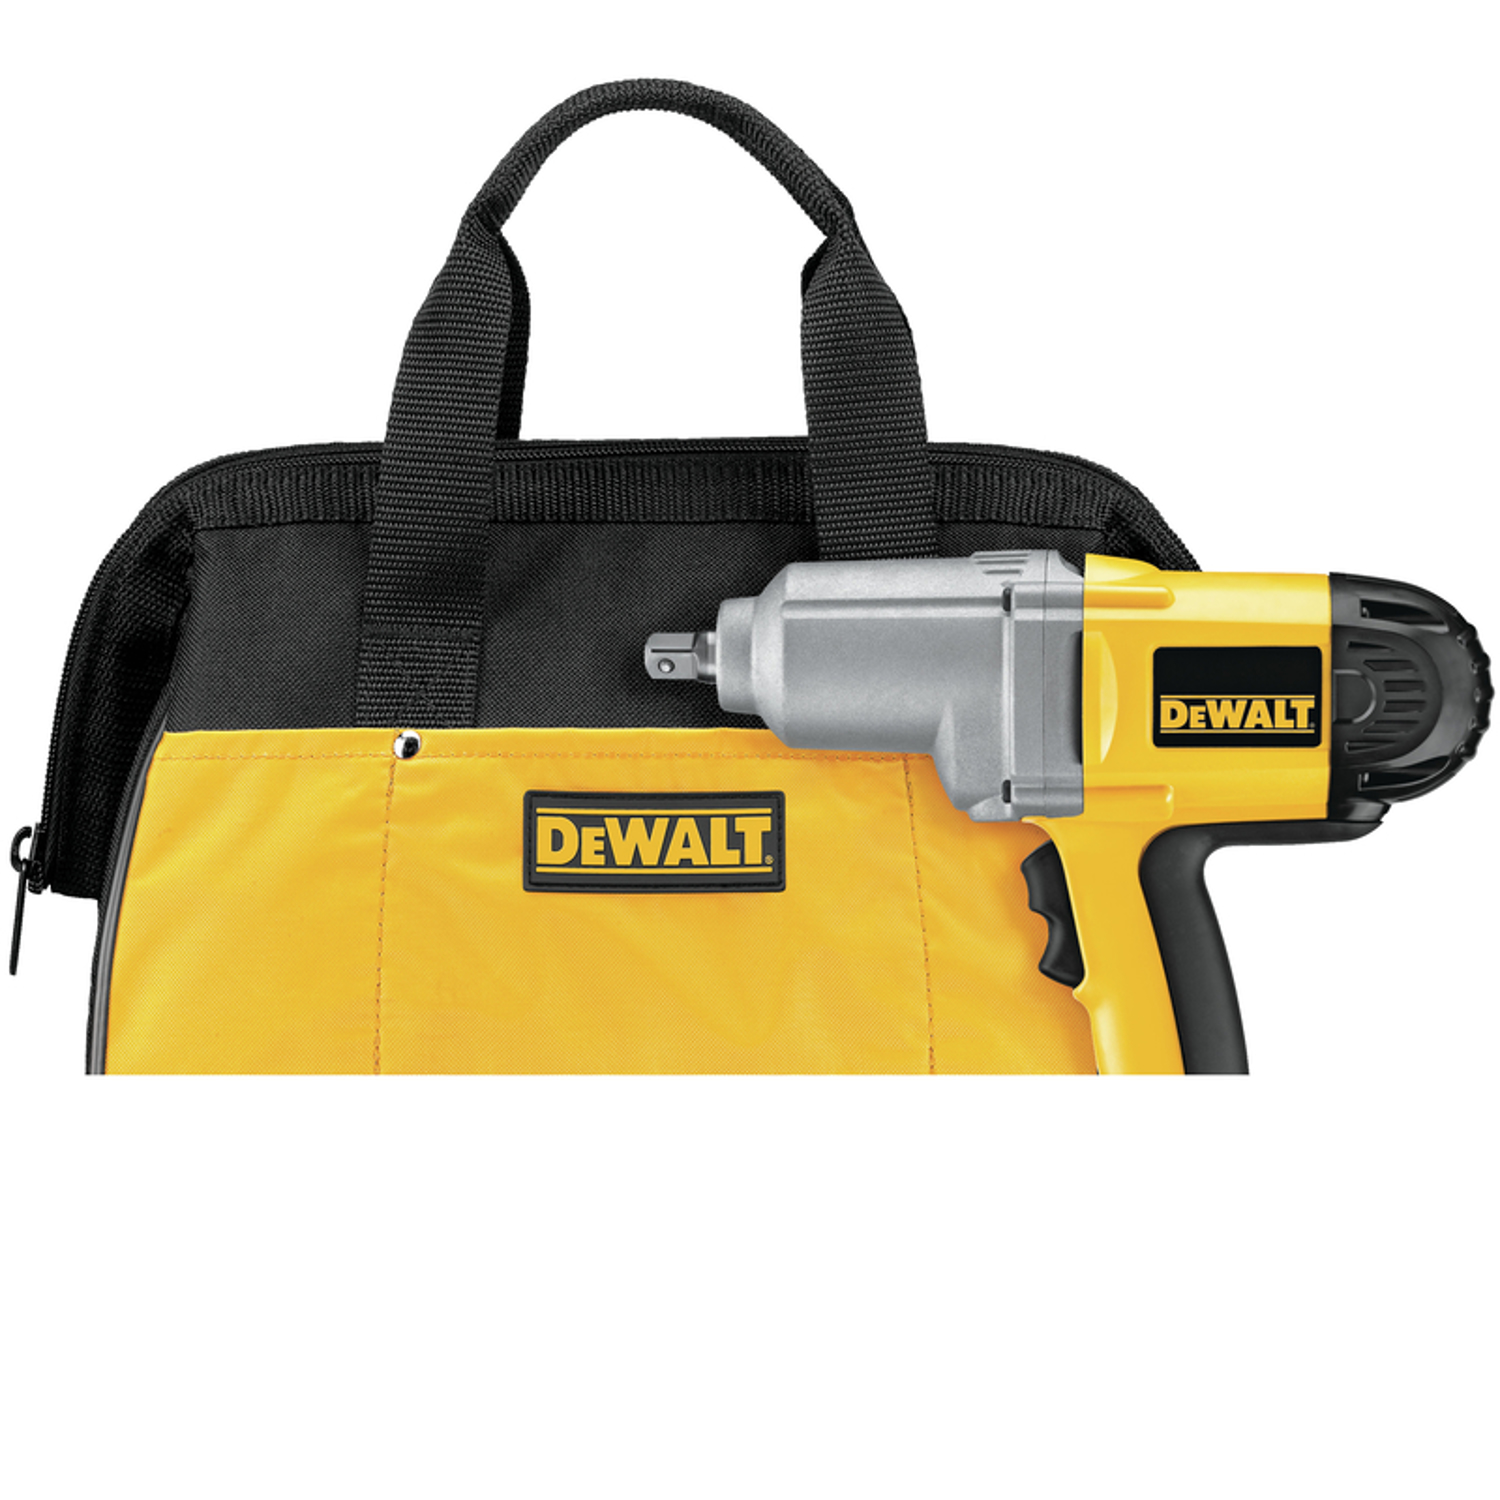 DEWALT 7.5 amps 1/2 in. Corded Brushed Impact Wrench